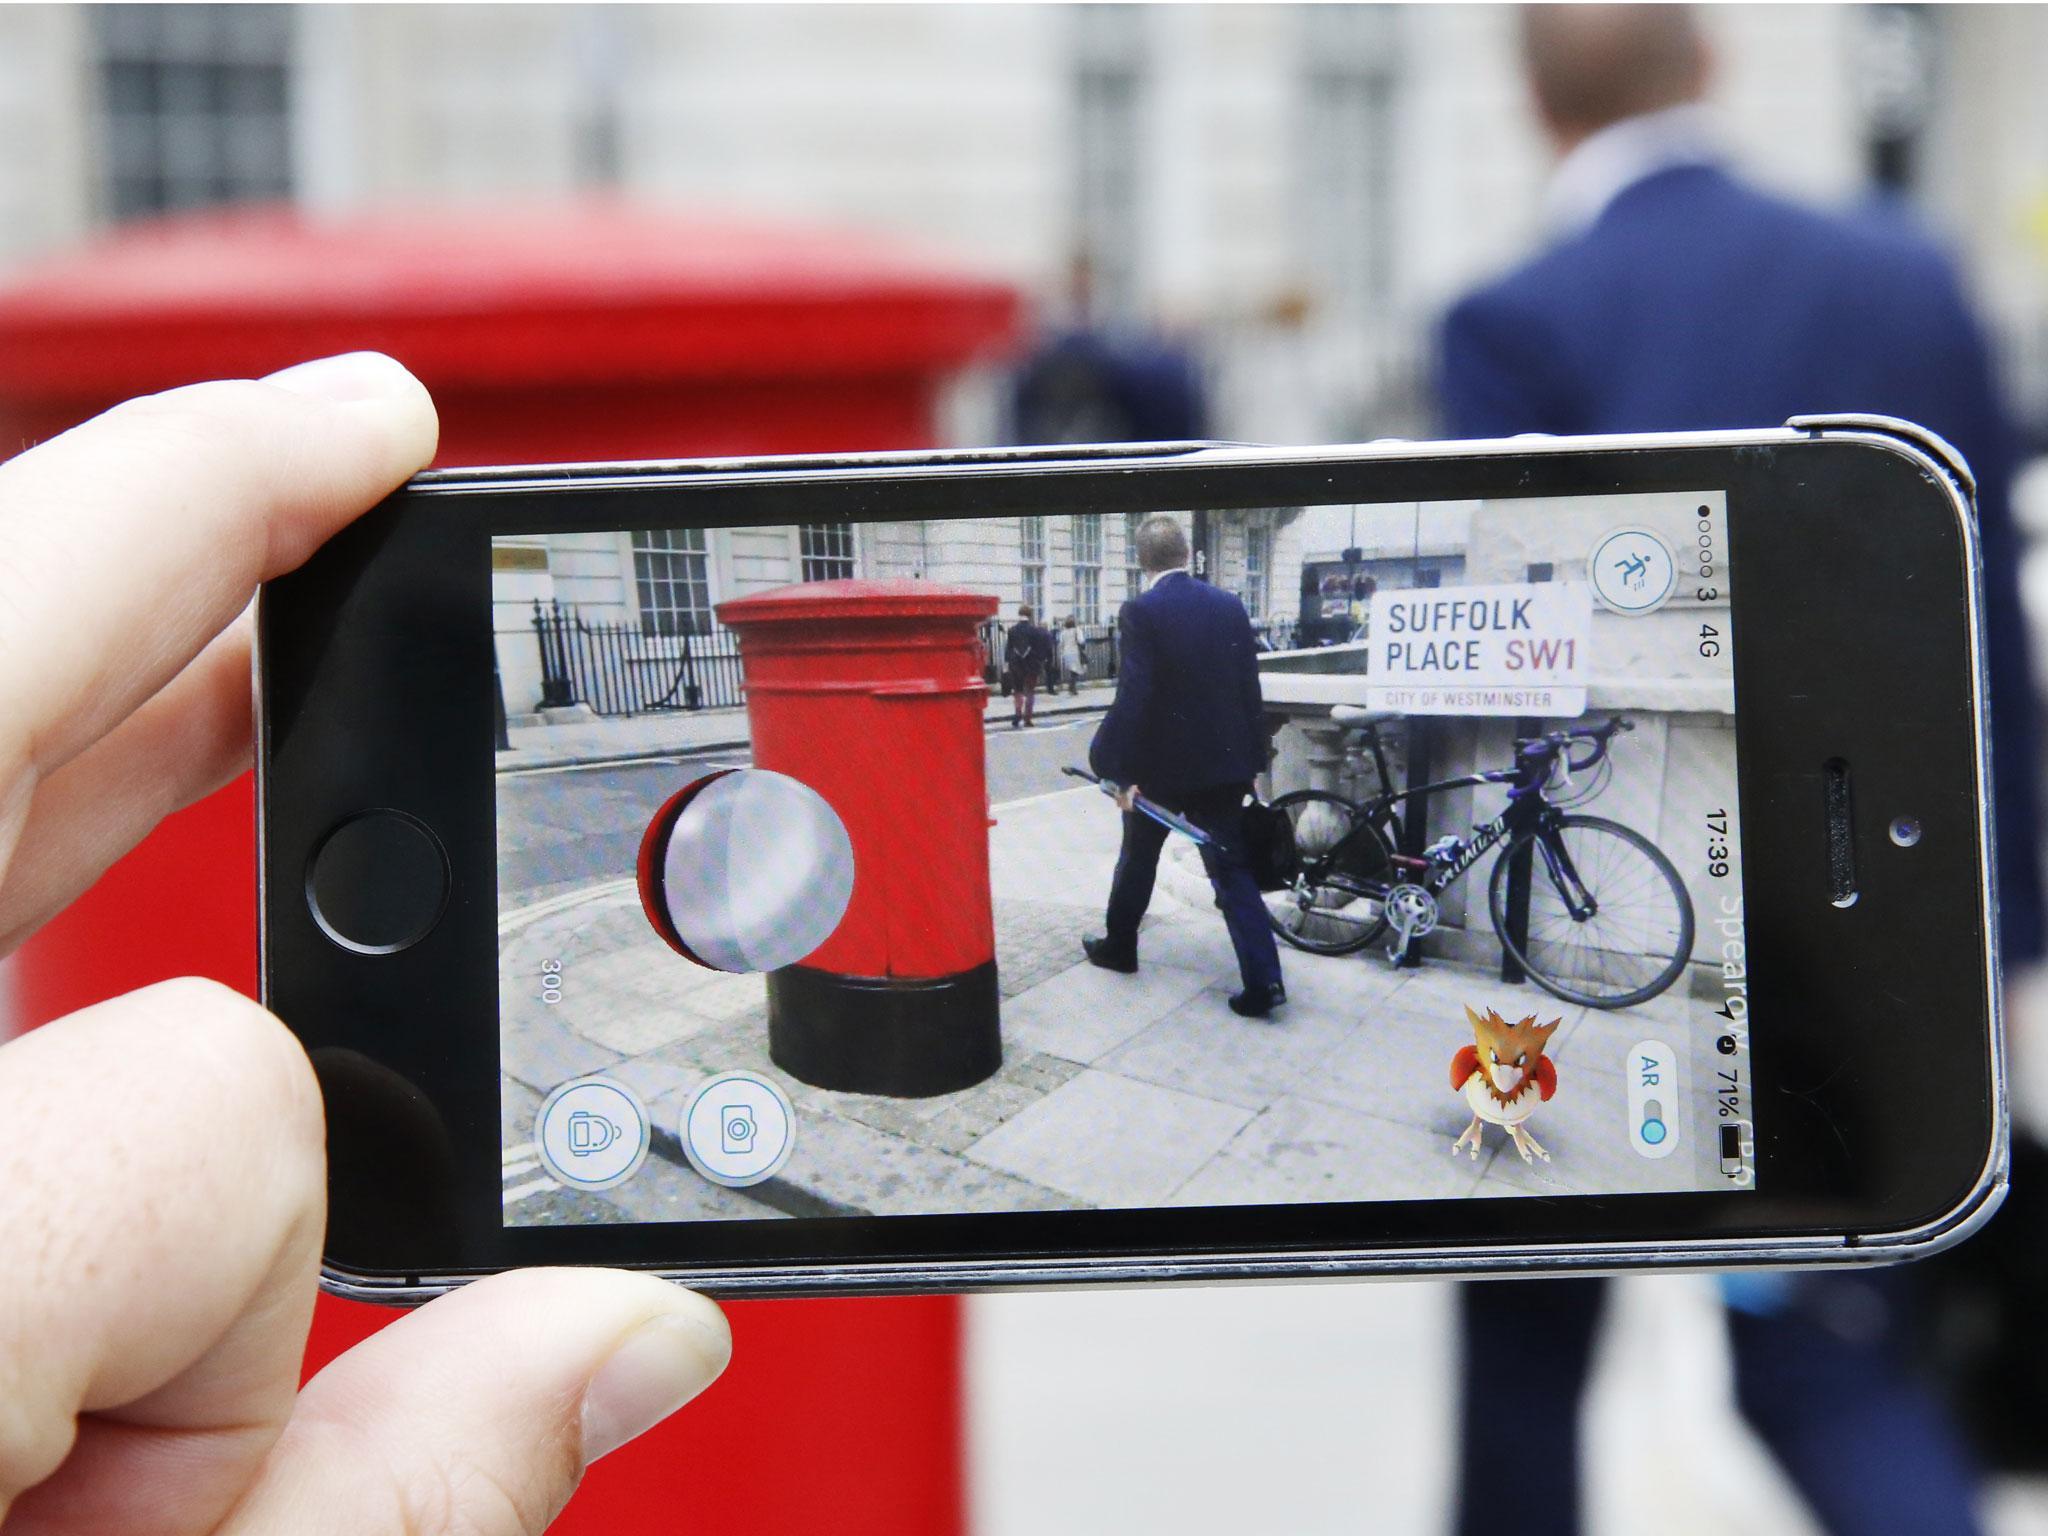 The augmented reality game has been a huge hit across the globe since its release last month